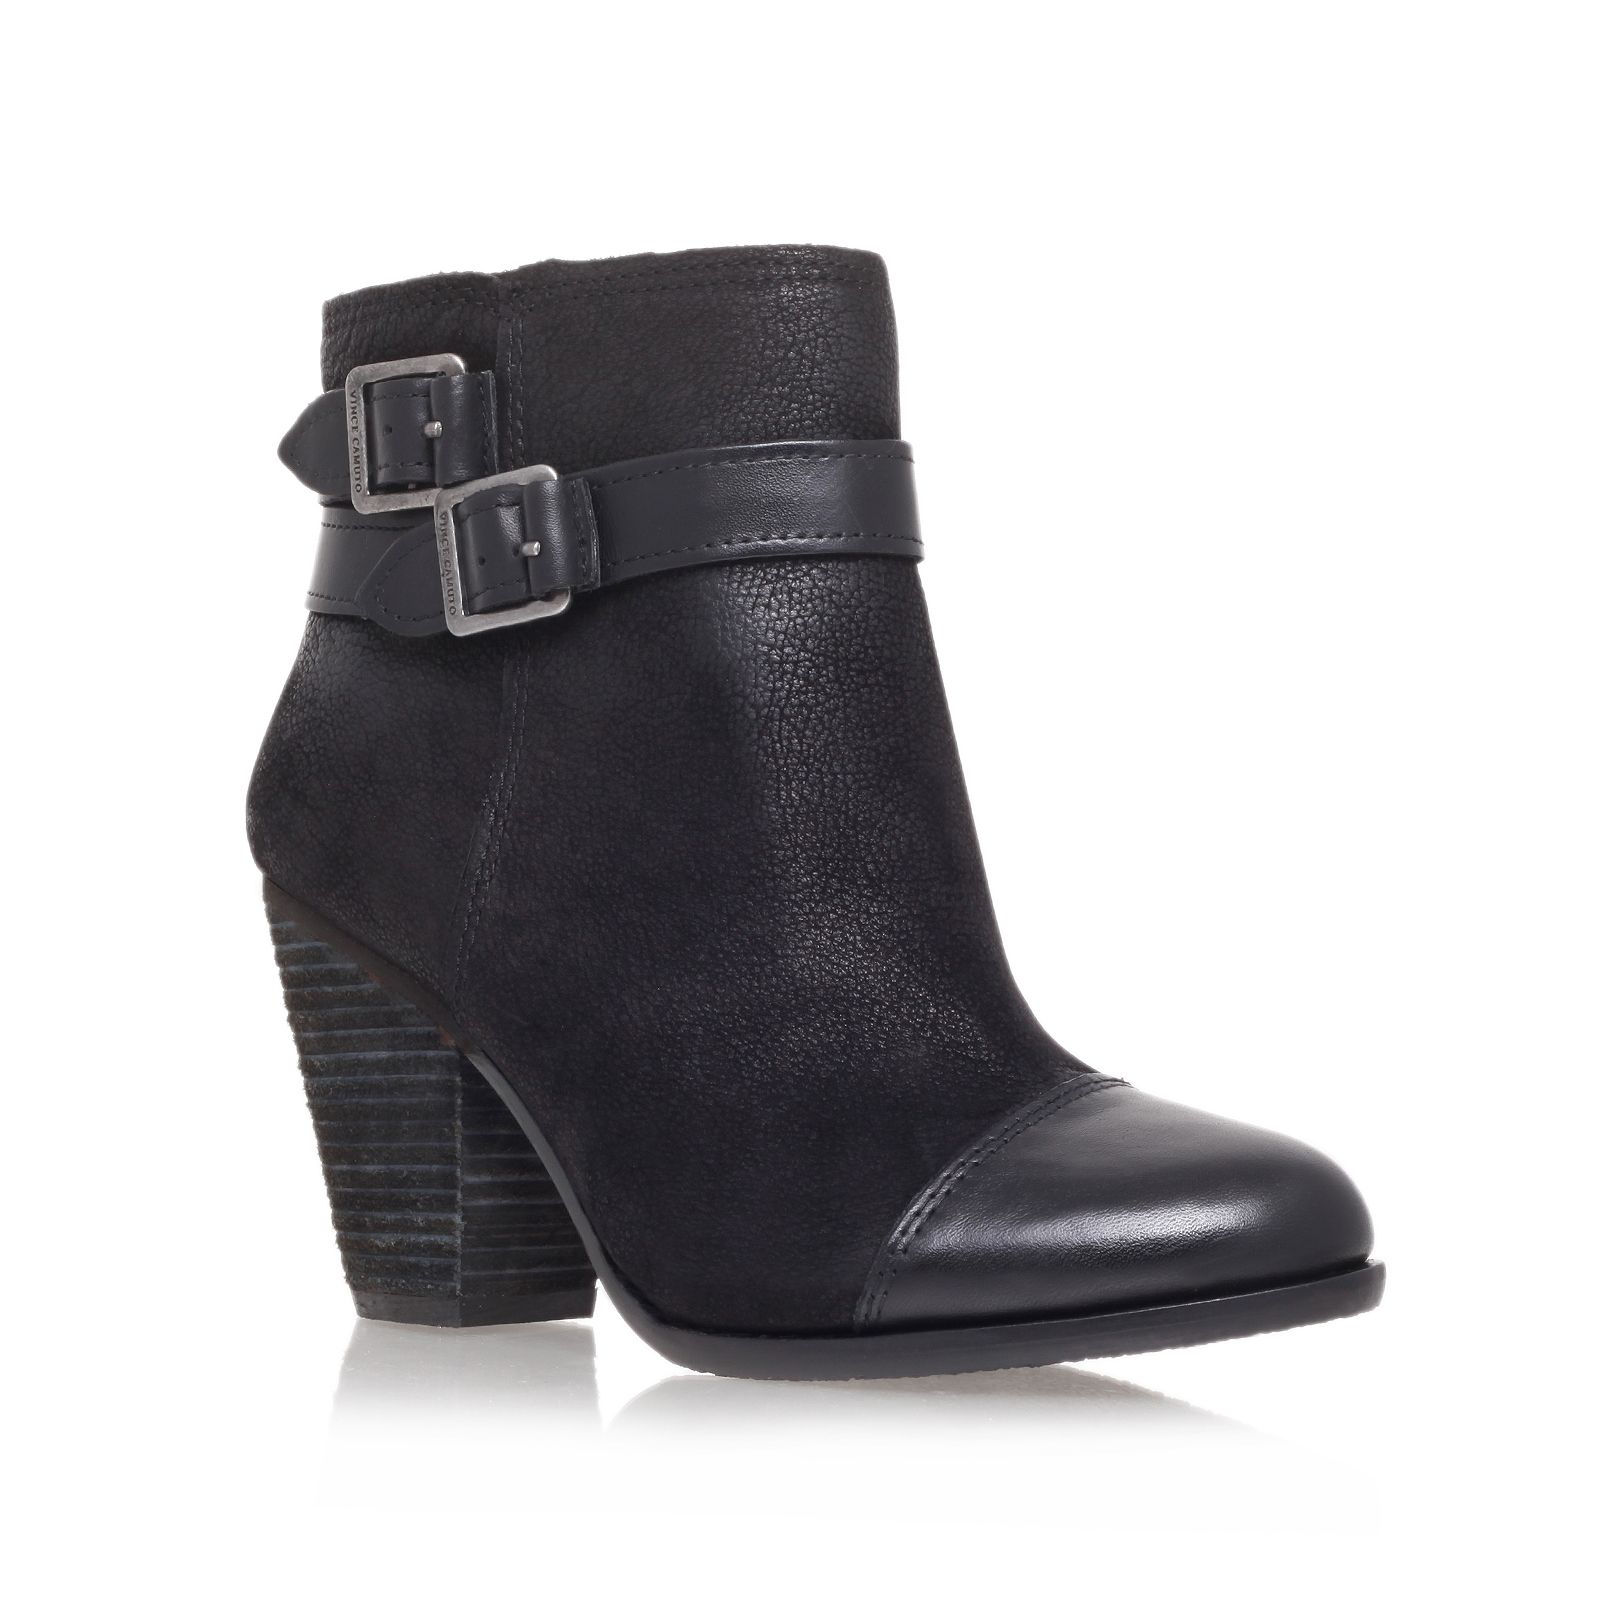 Vince Camuto Hasia High Heel Ankle Boots in Black | Lyst